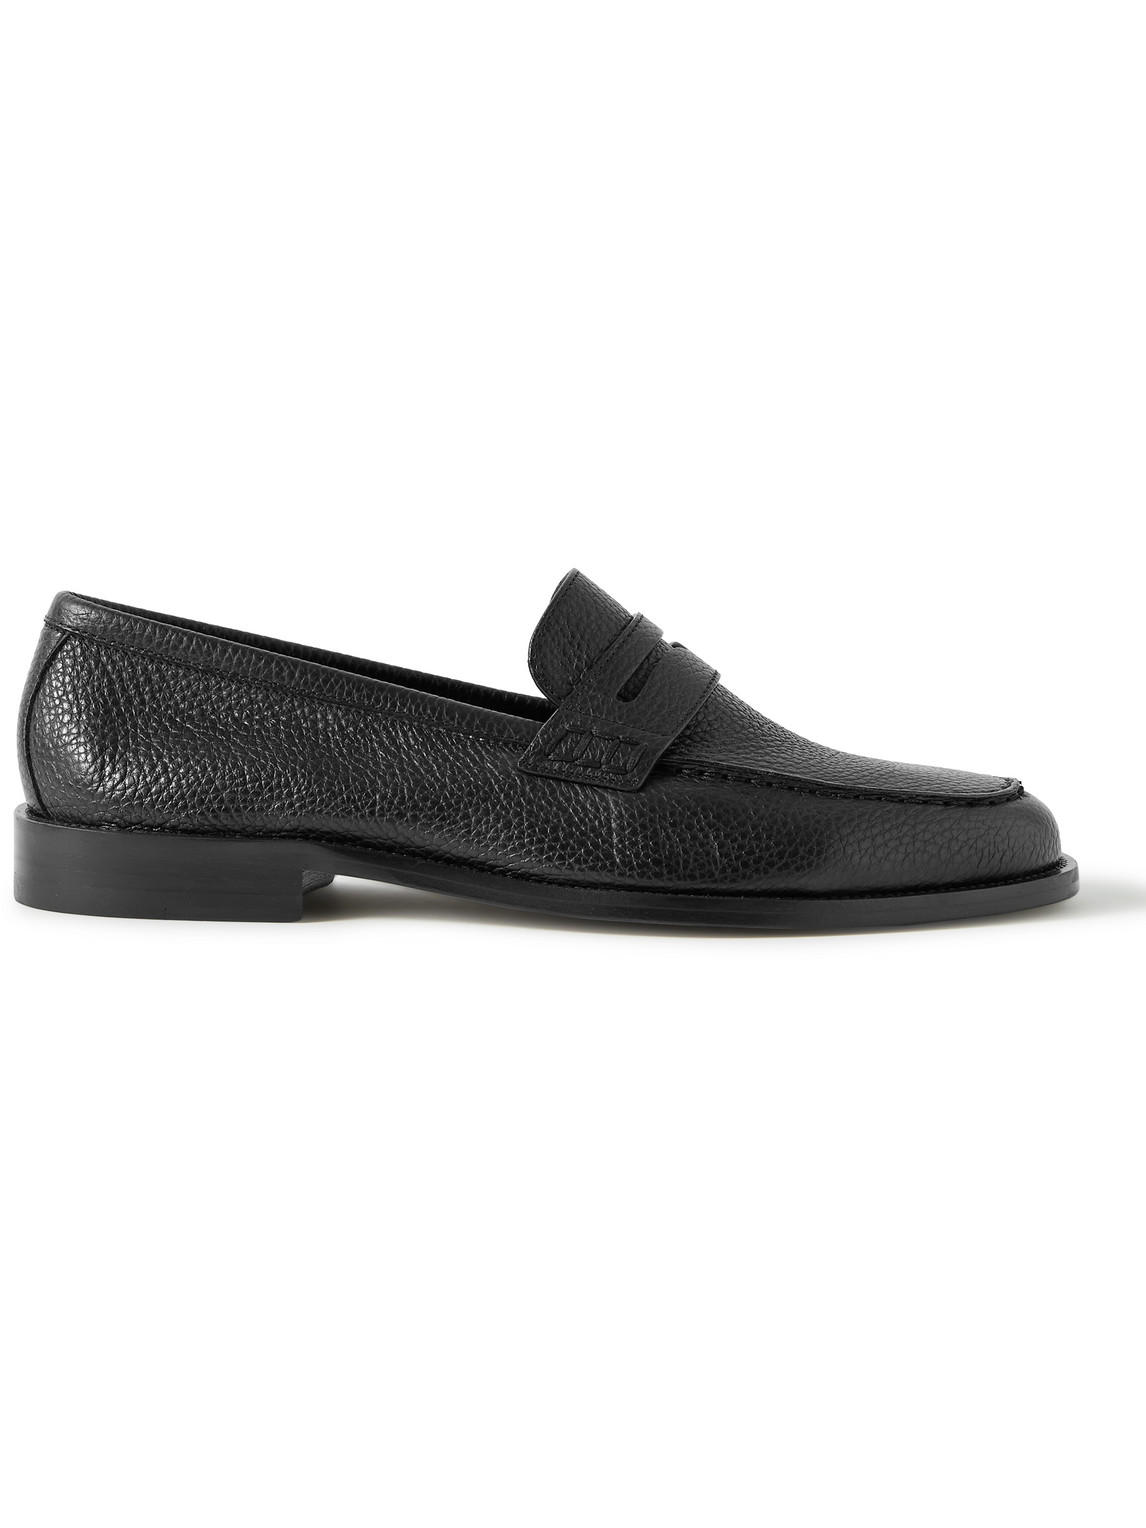 MANOLO BLAHNIK PERRY FULL-GRAIN LEATHER PENNY LOAFERS